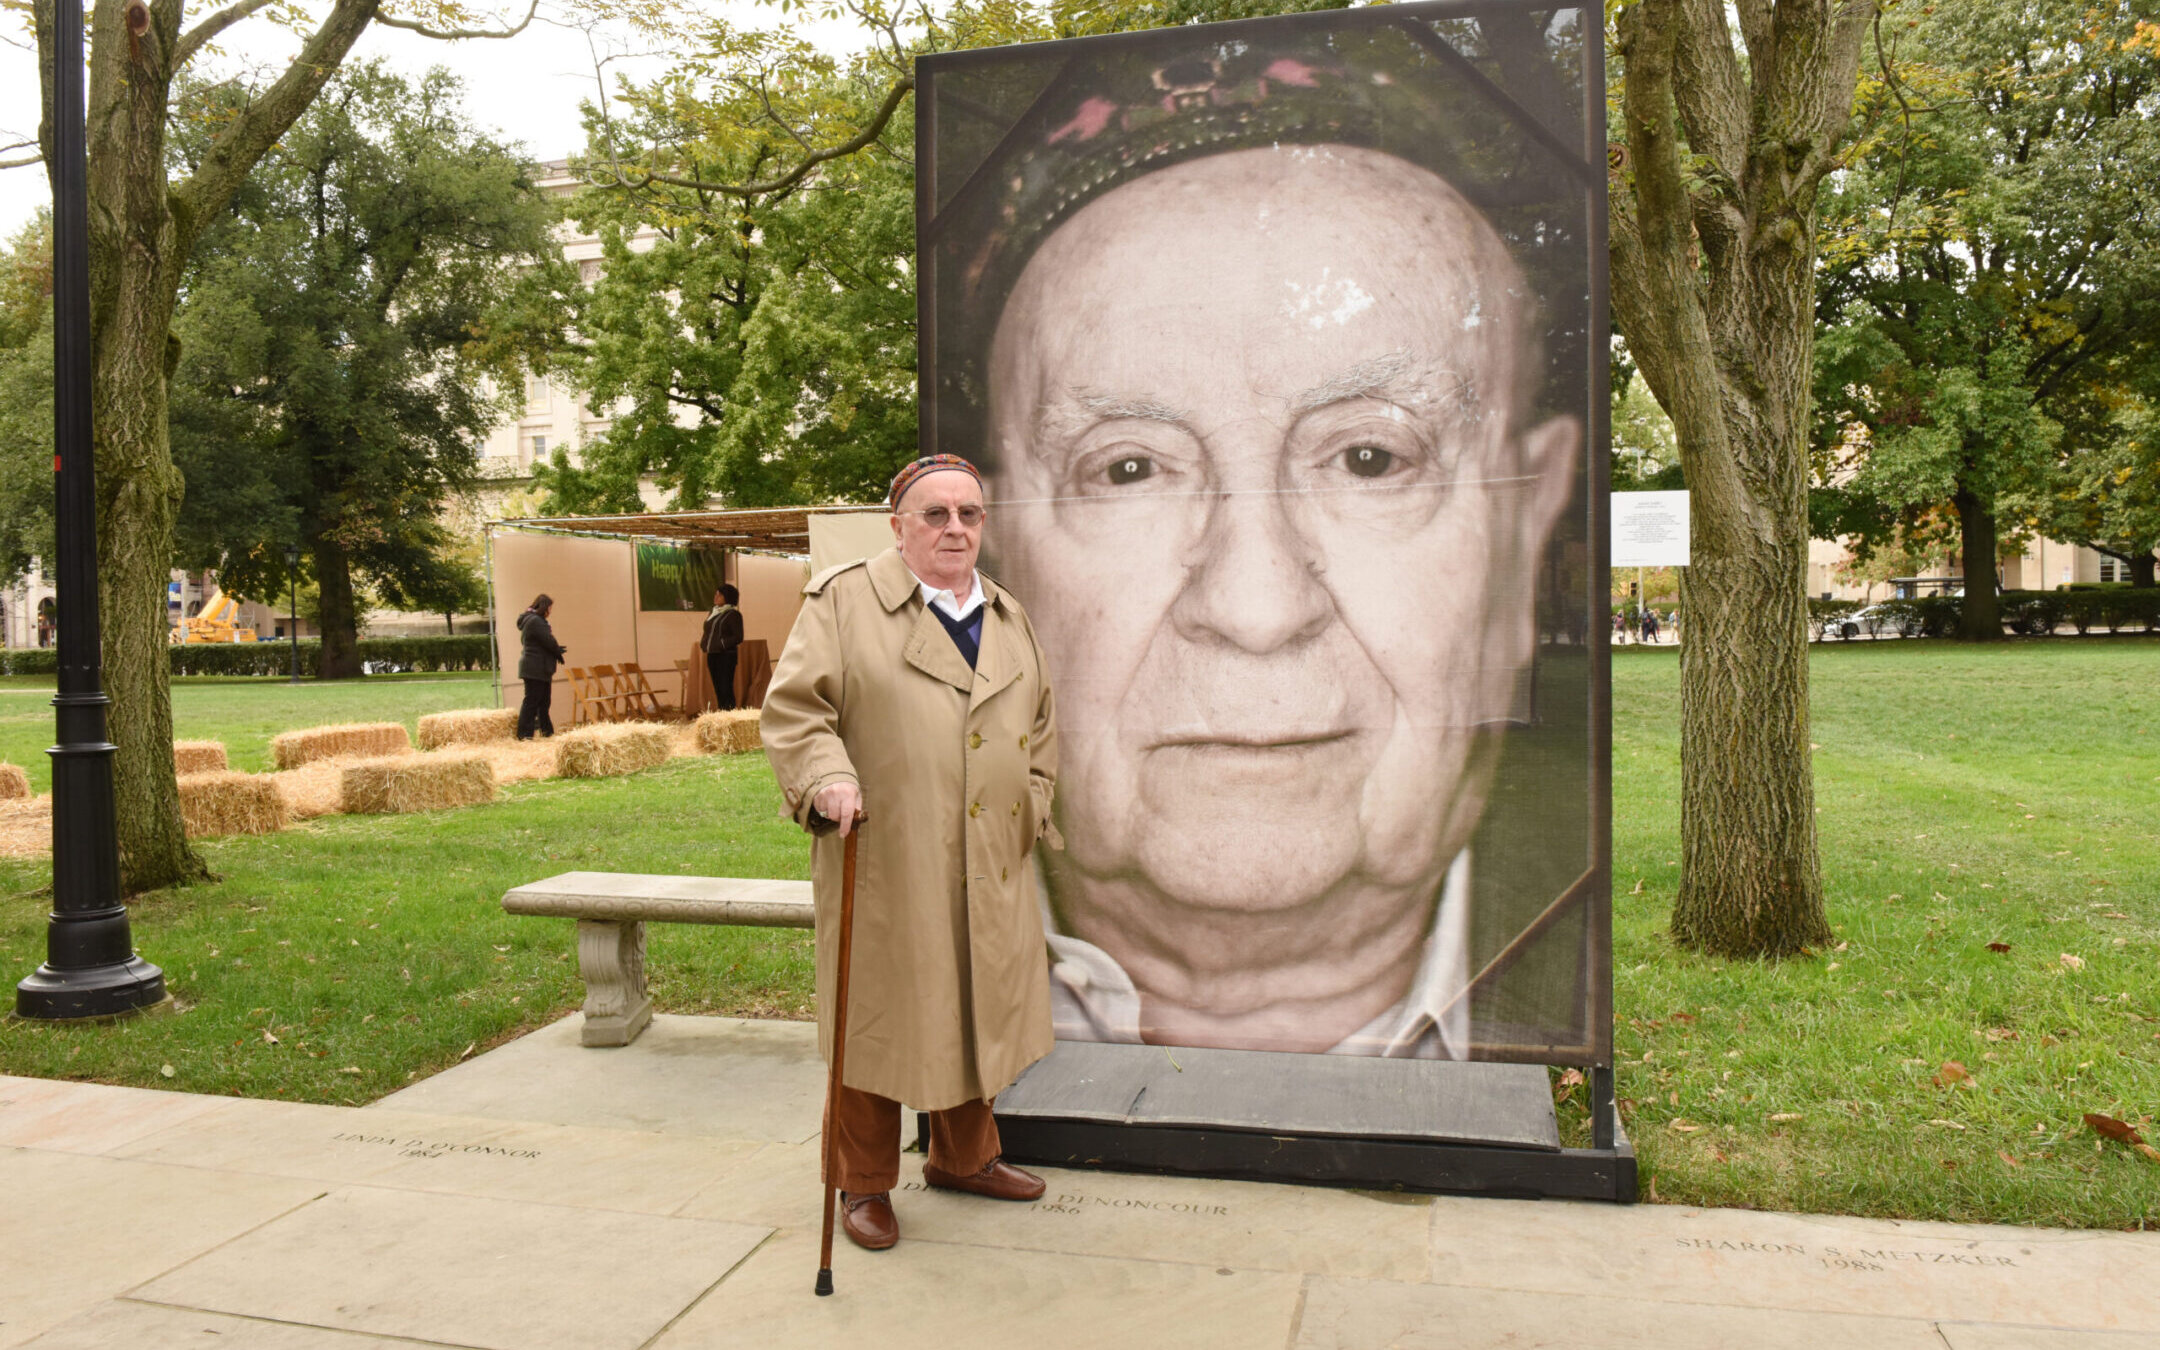 Judah Samet stands next to his portrait, part of Luigi Toscano’s “Lest We Forget” project at the University of Pittsburgh in 2019. (Photo by Hector Corante, courtesy of Holocaust Center of Pittsburgh)